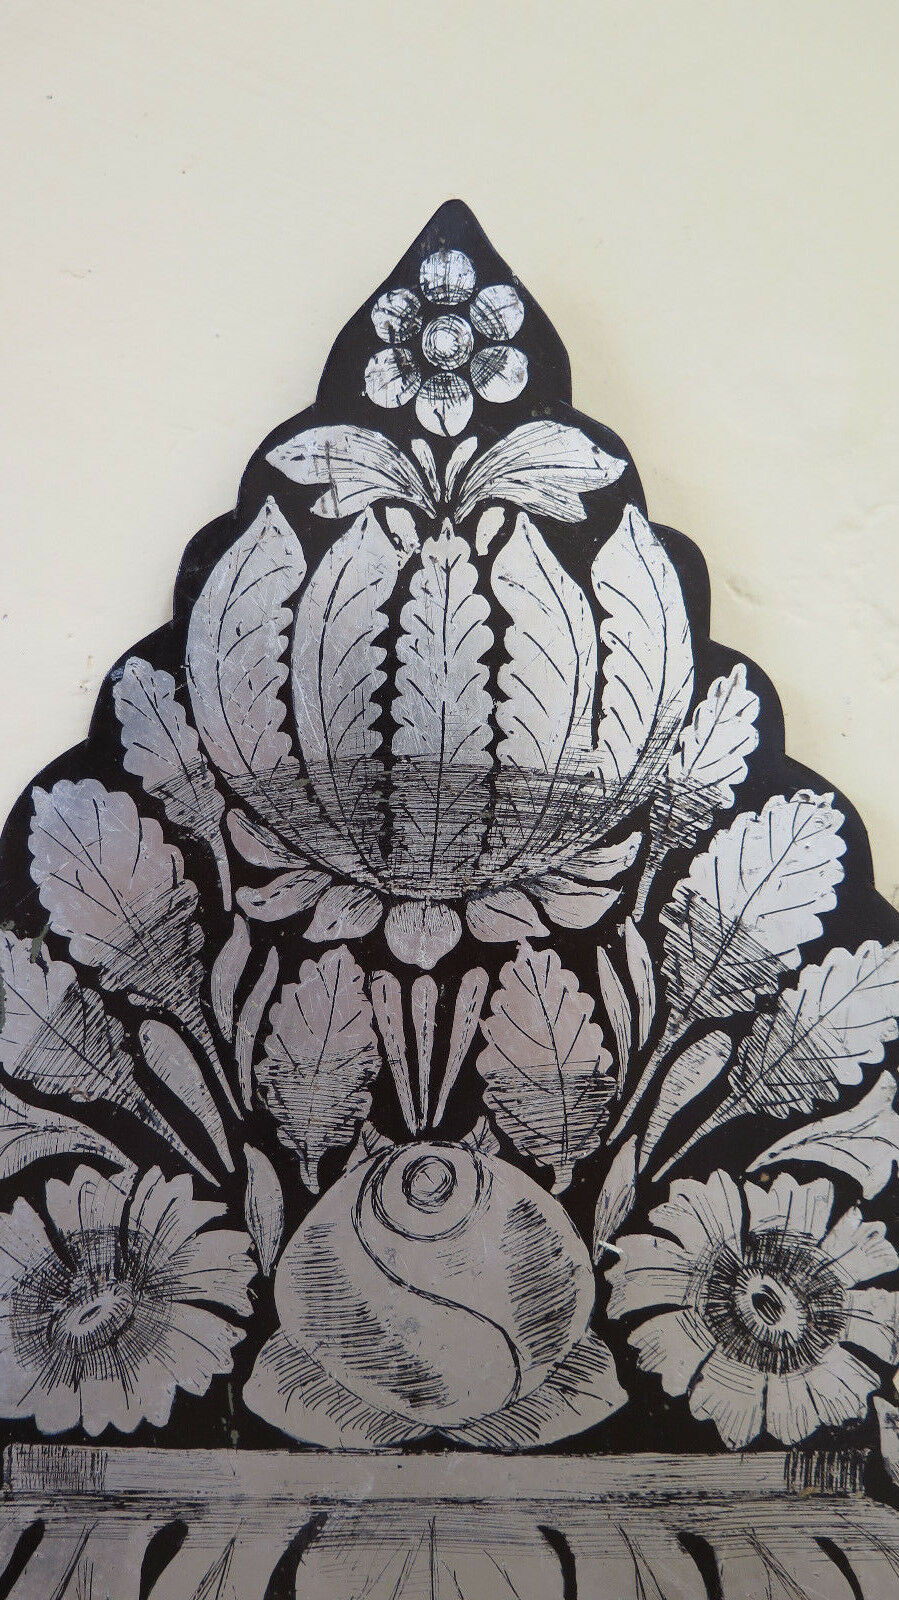 ANTIQUE PAINTING PAINTED AND ENGRAVED ON IRON IN FLORAL STYLE FLOWERS CH13 18